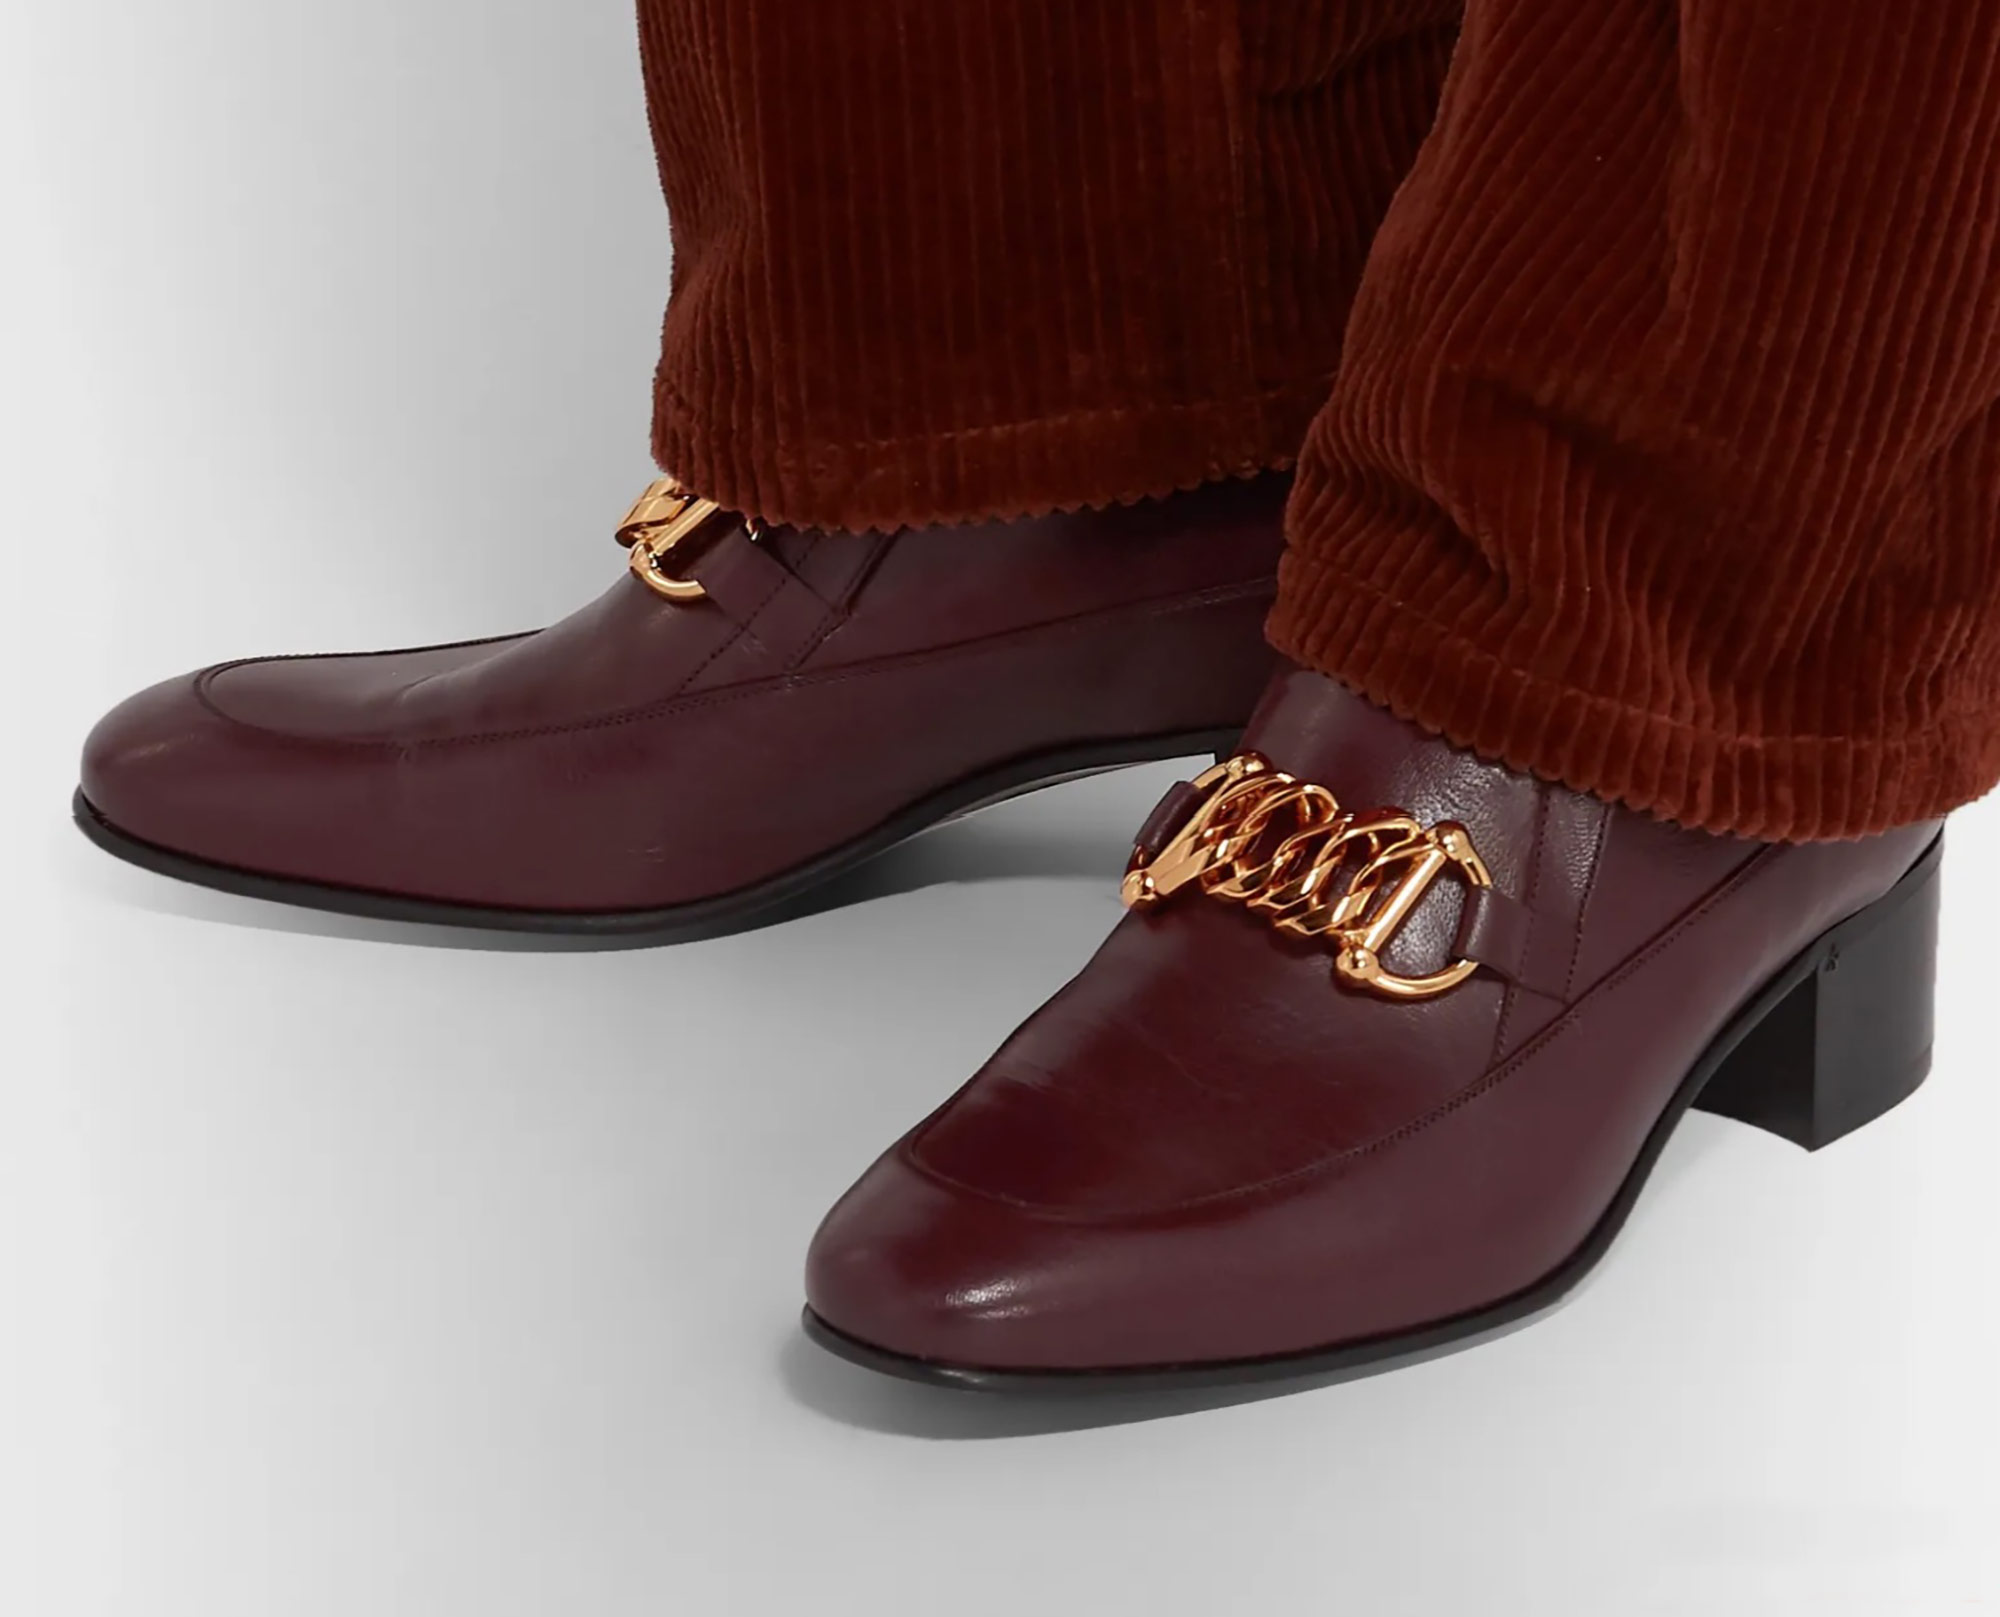 The Winter Wish List: Boots & Shoes - 1792 Style